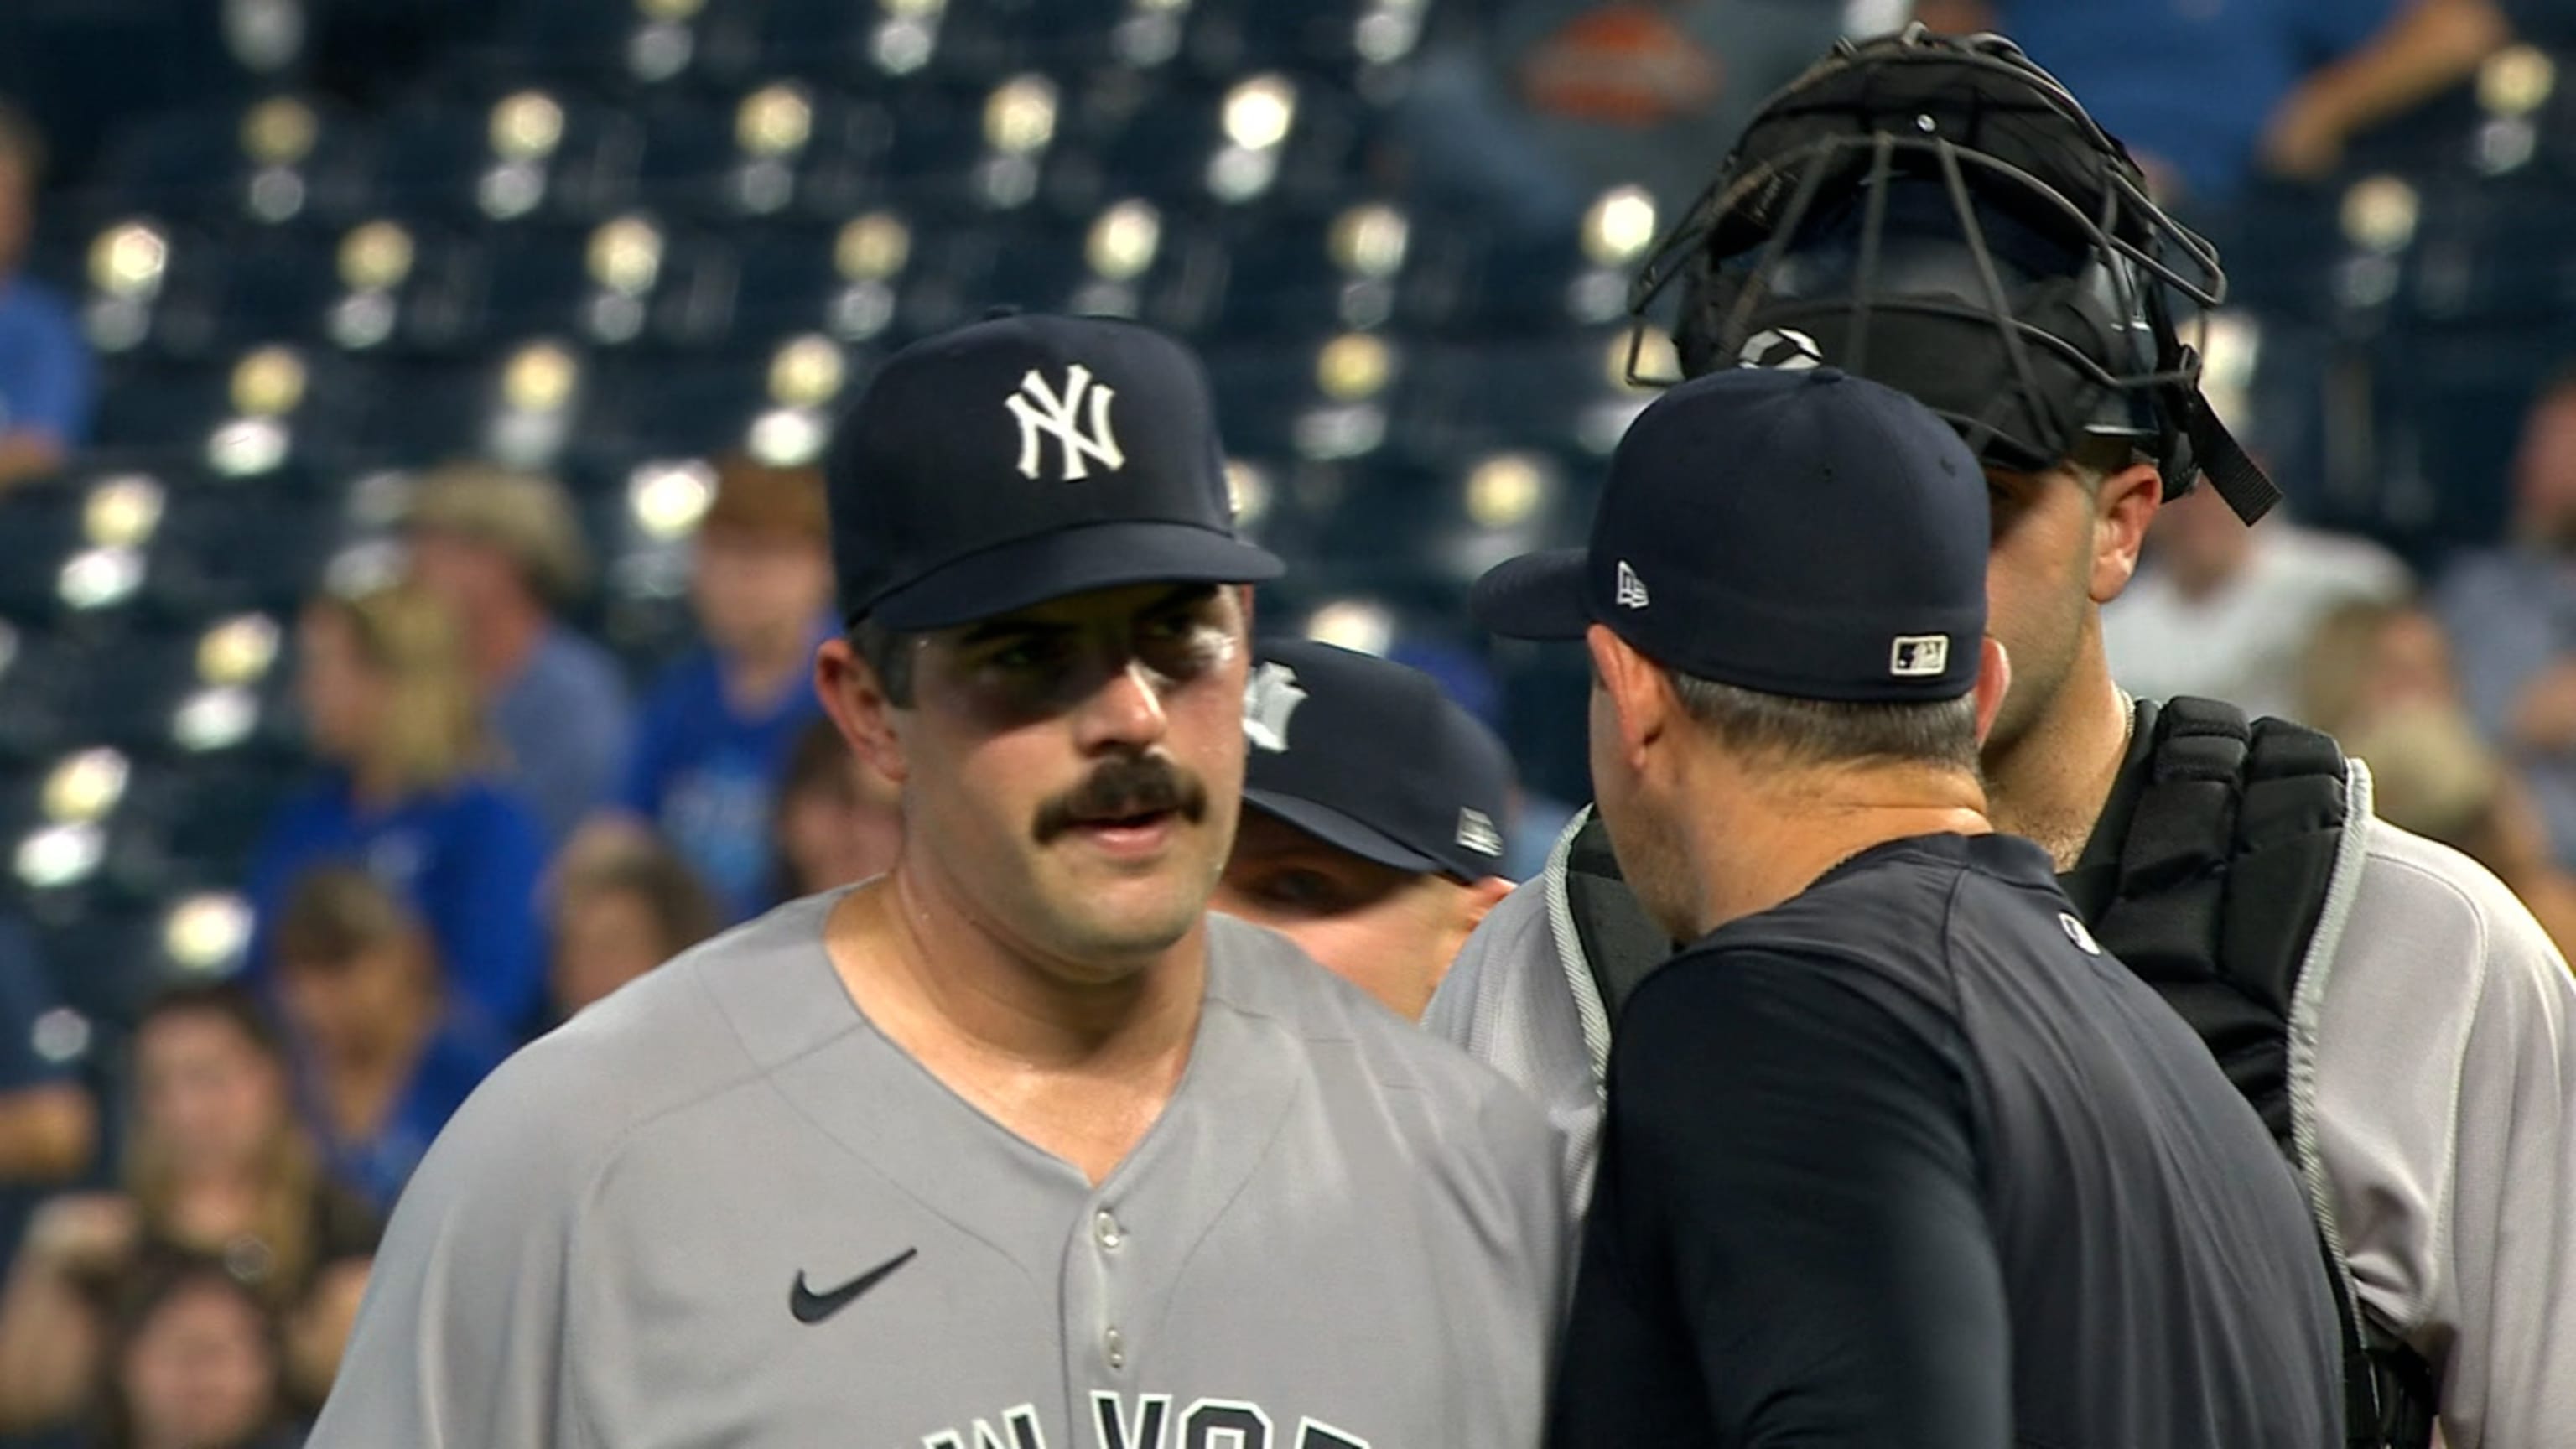 New York Yankees Embarrass Again With Treatment of 'Hometown Kid